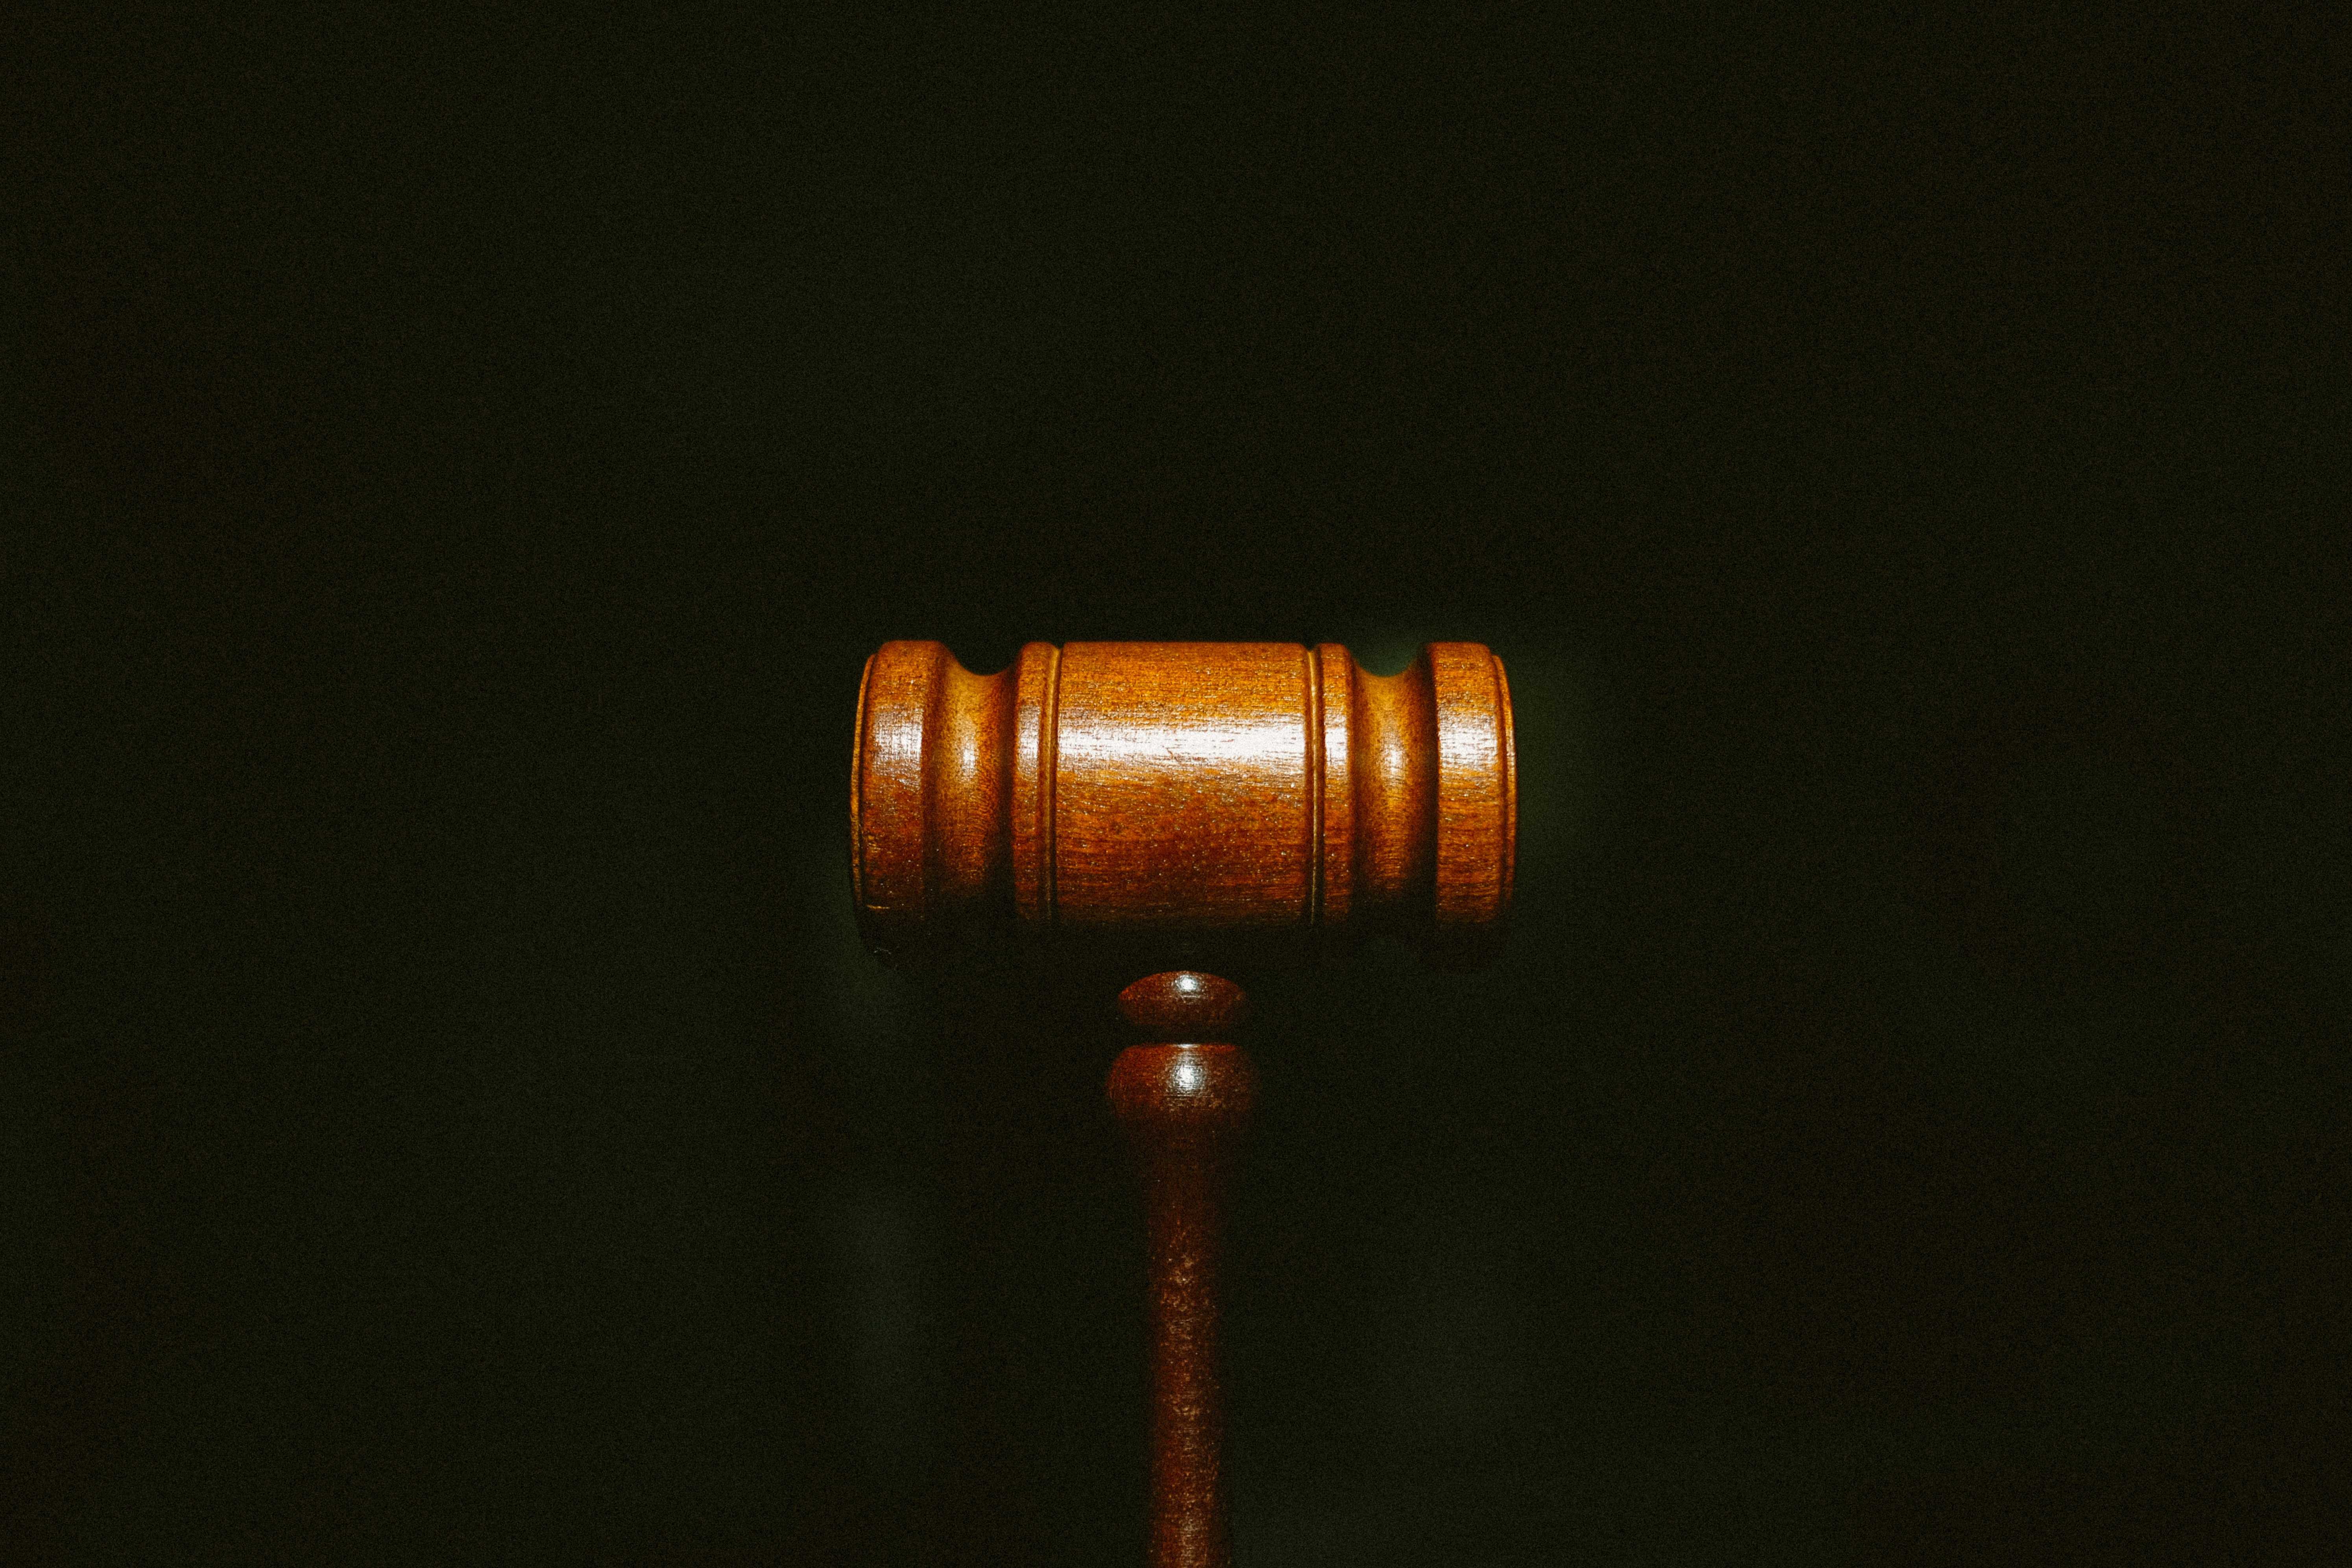 Photograph of a judge's gavel